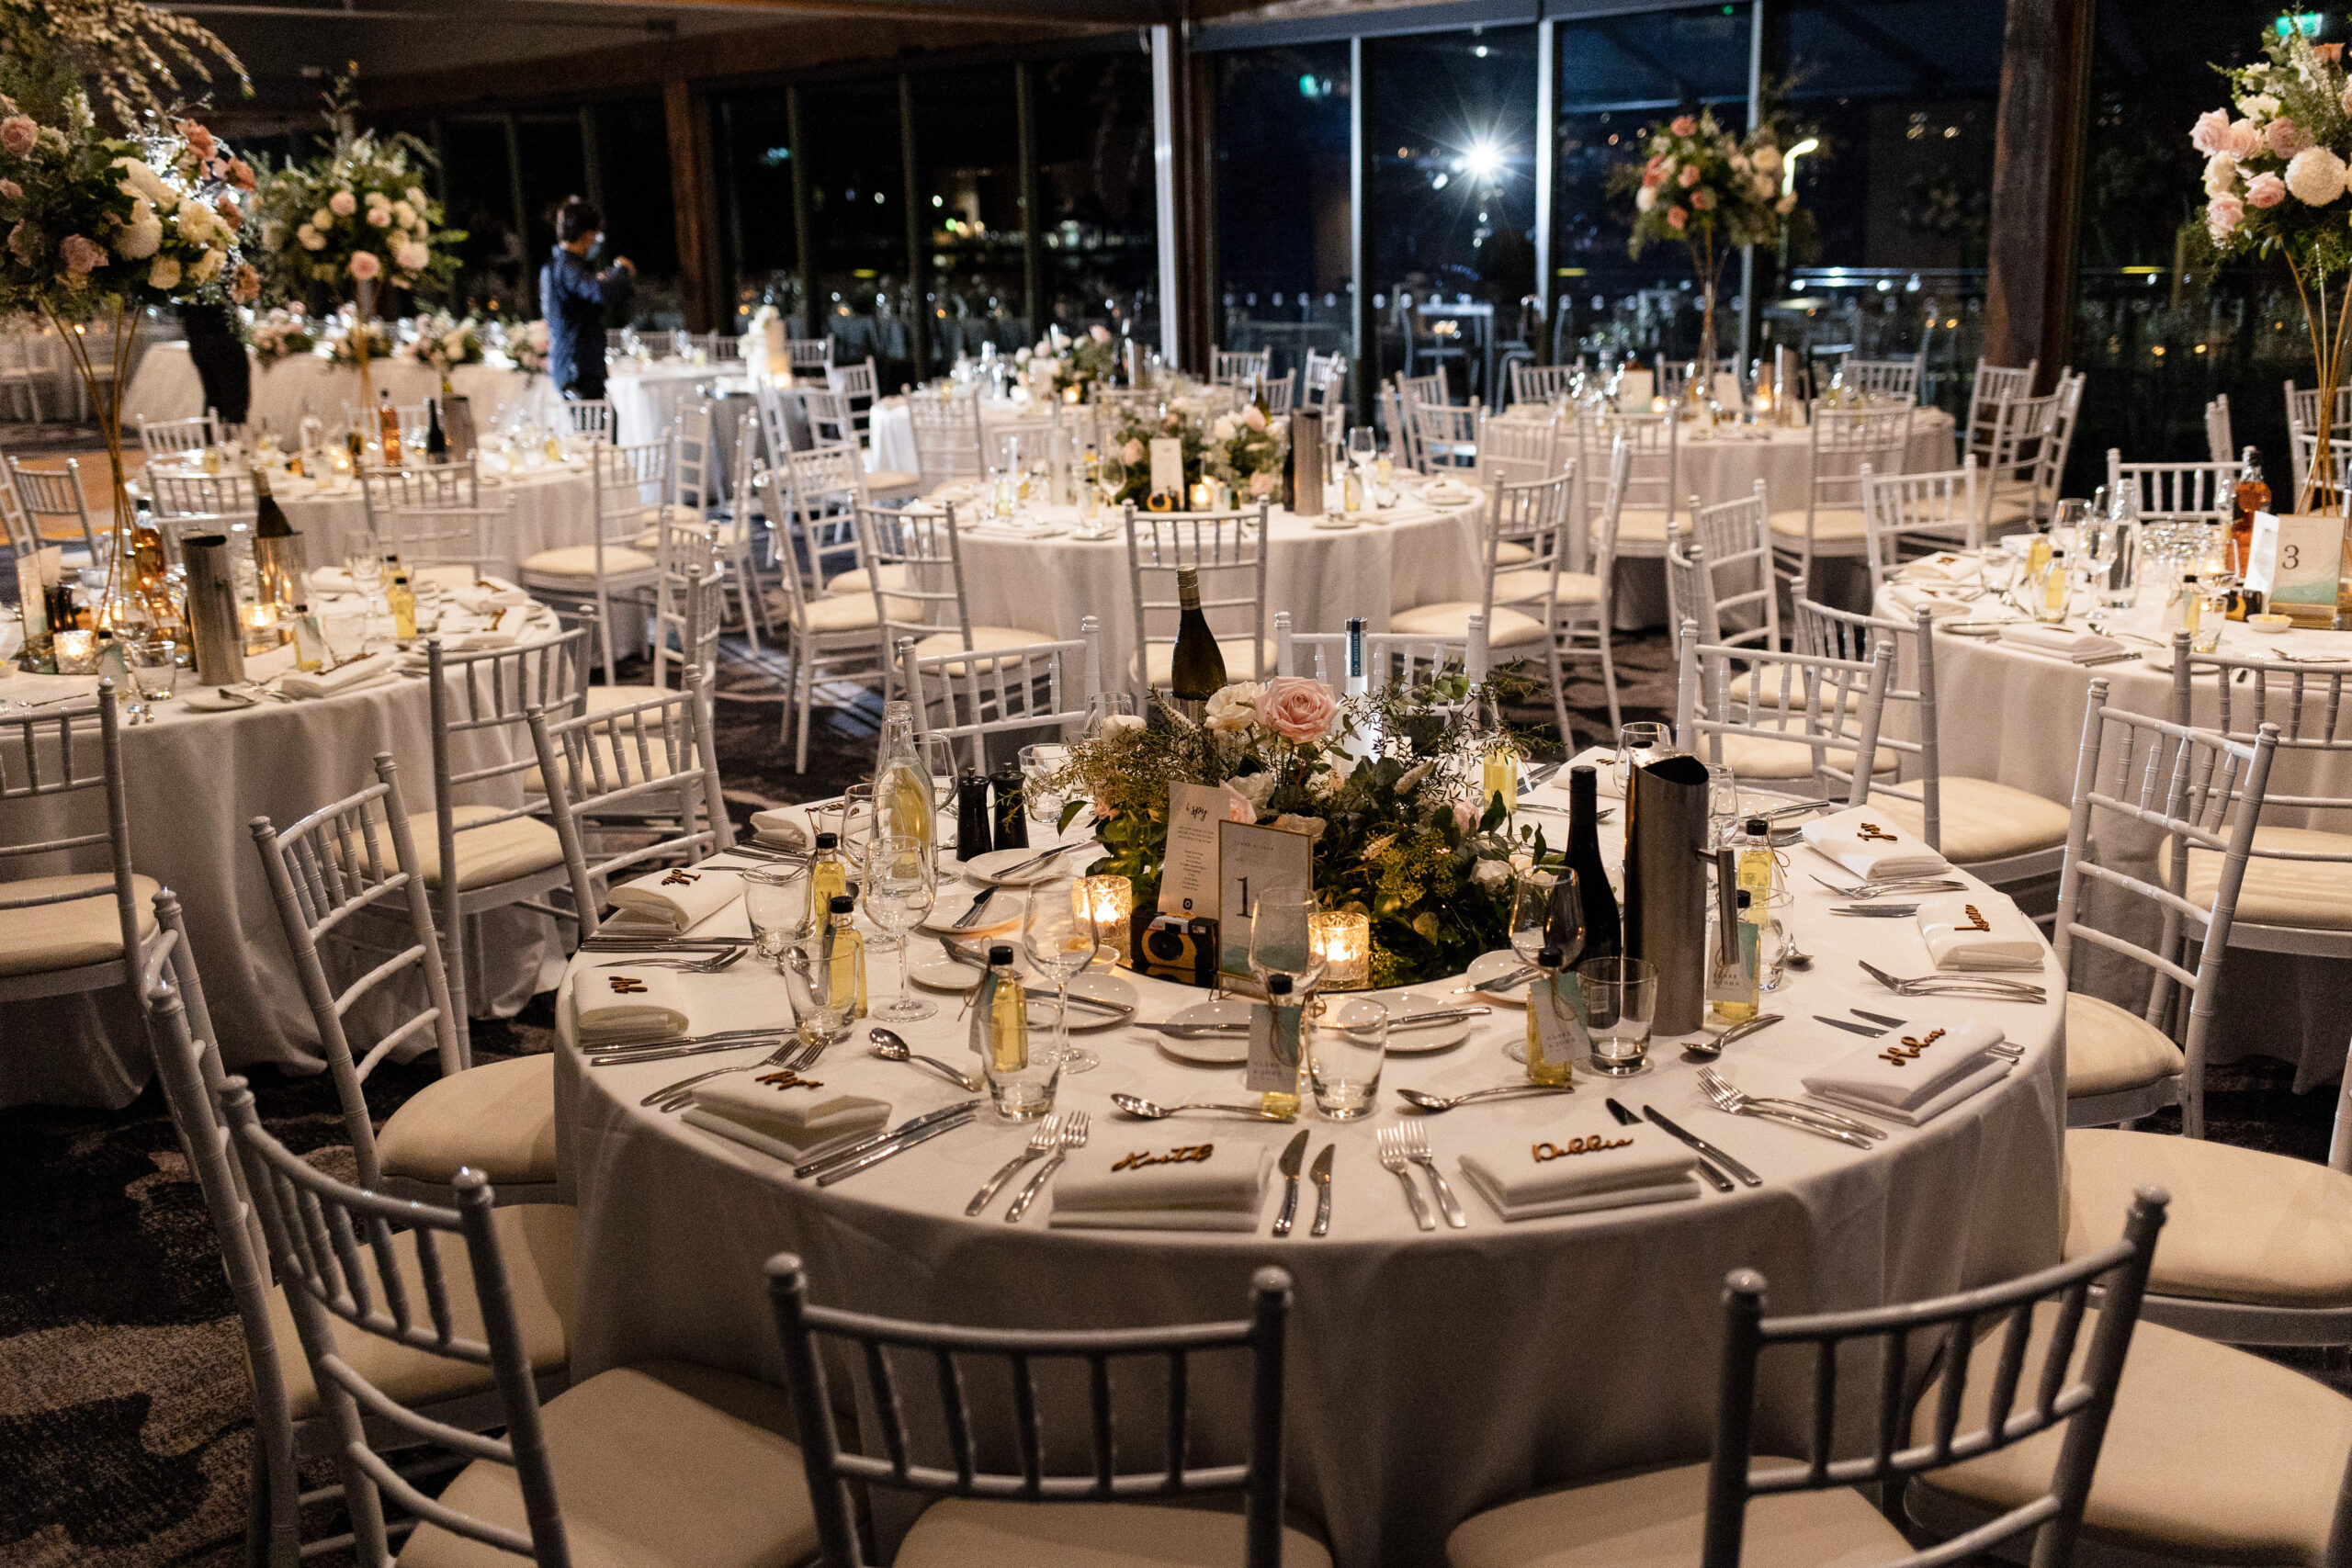 Why is Deckhouse the Perfect Venue for Your Next Event?